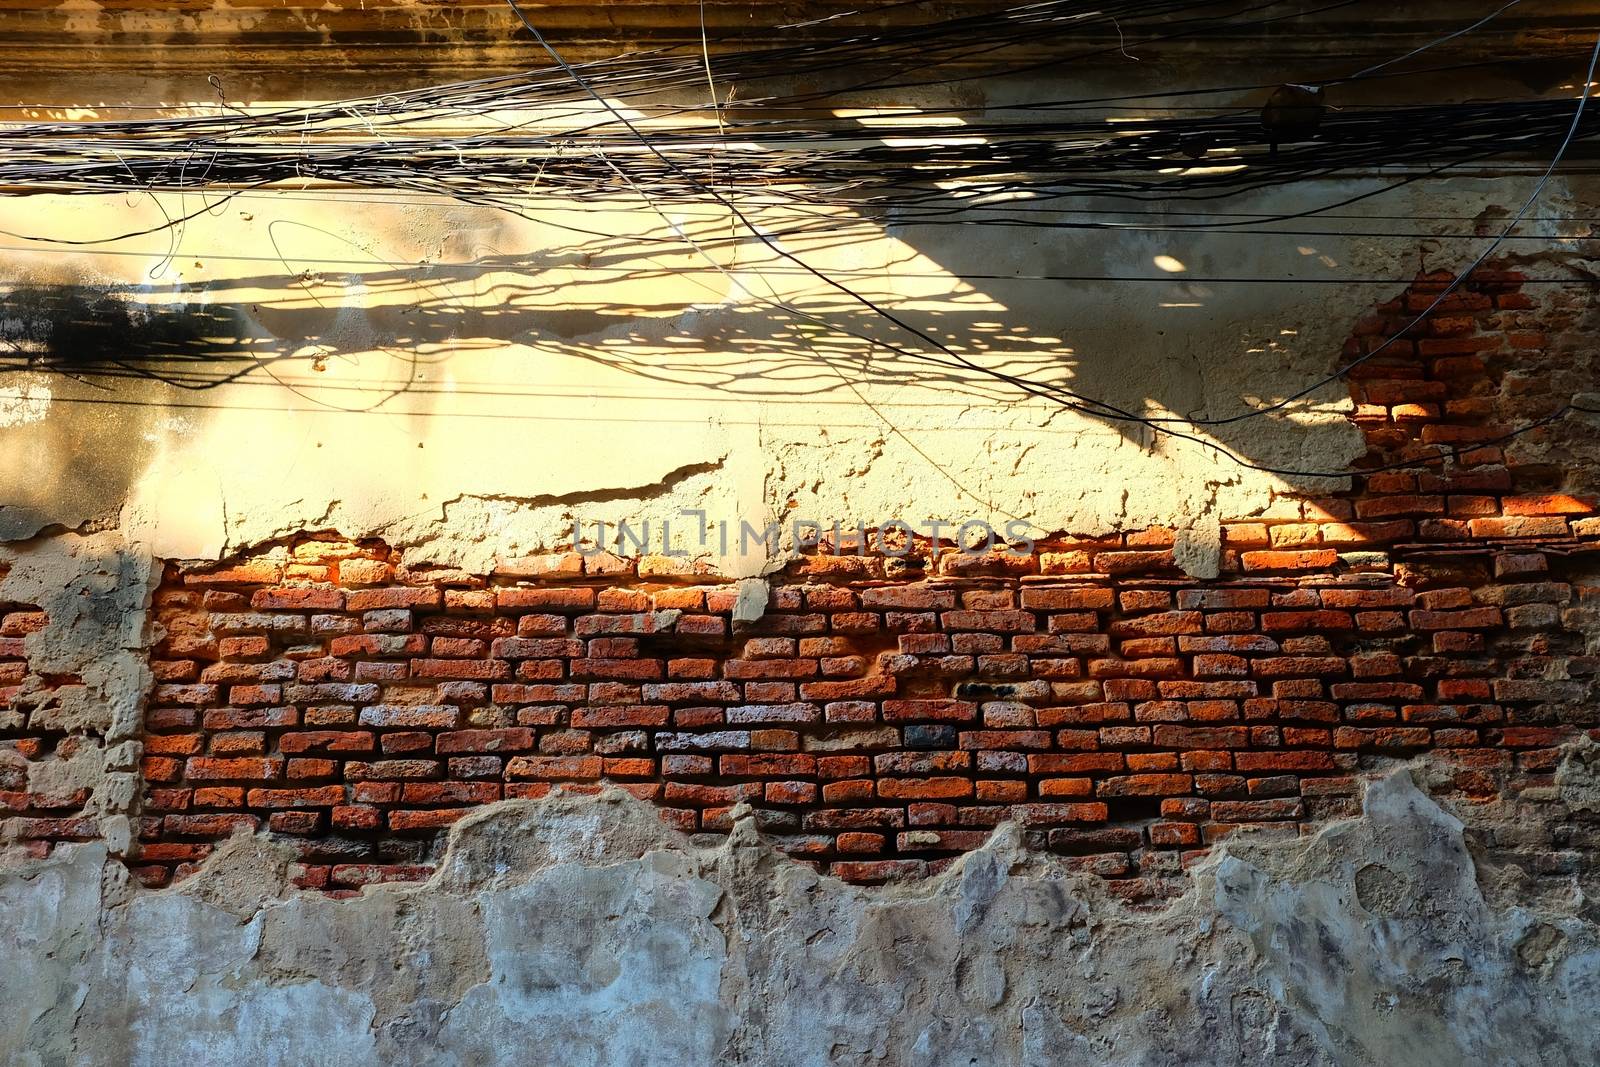 Messy Electrical Wires with Broken Old Brick Wall.